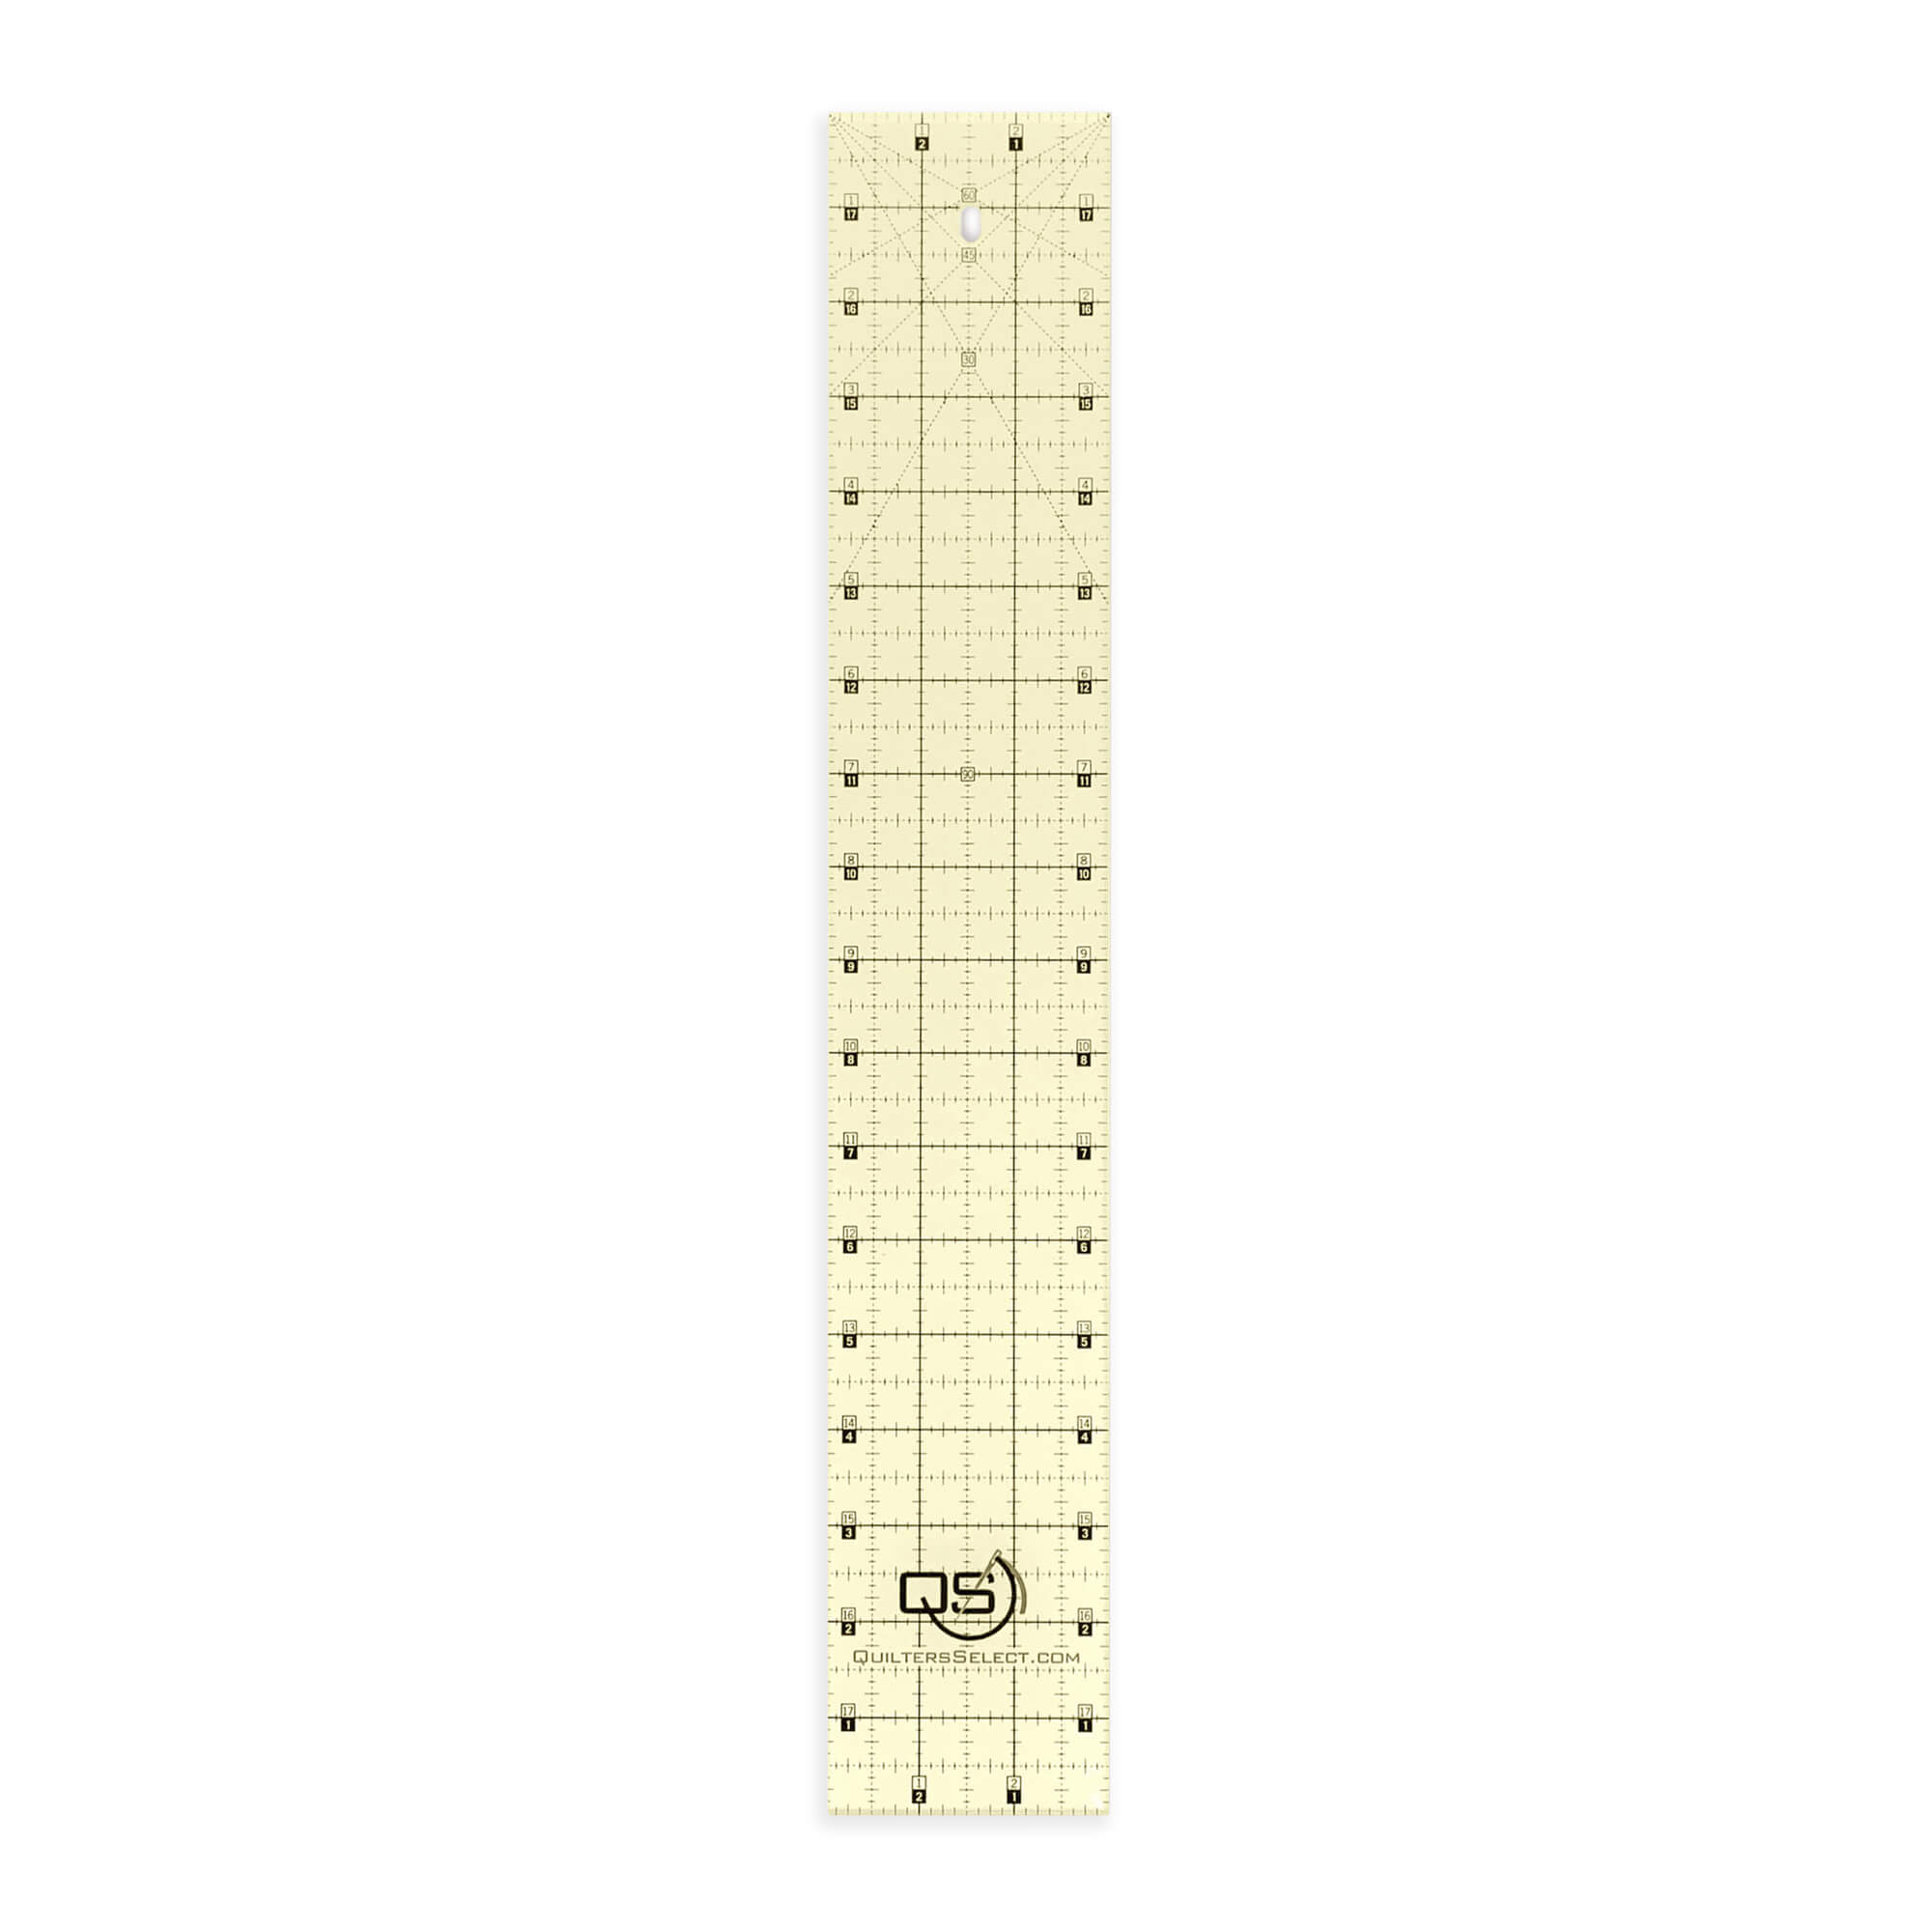 3 X 18 Inch Non-slip Quilting Ruler